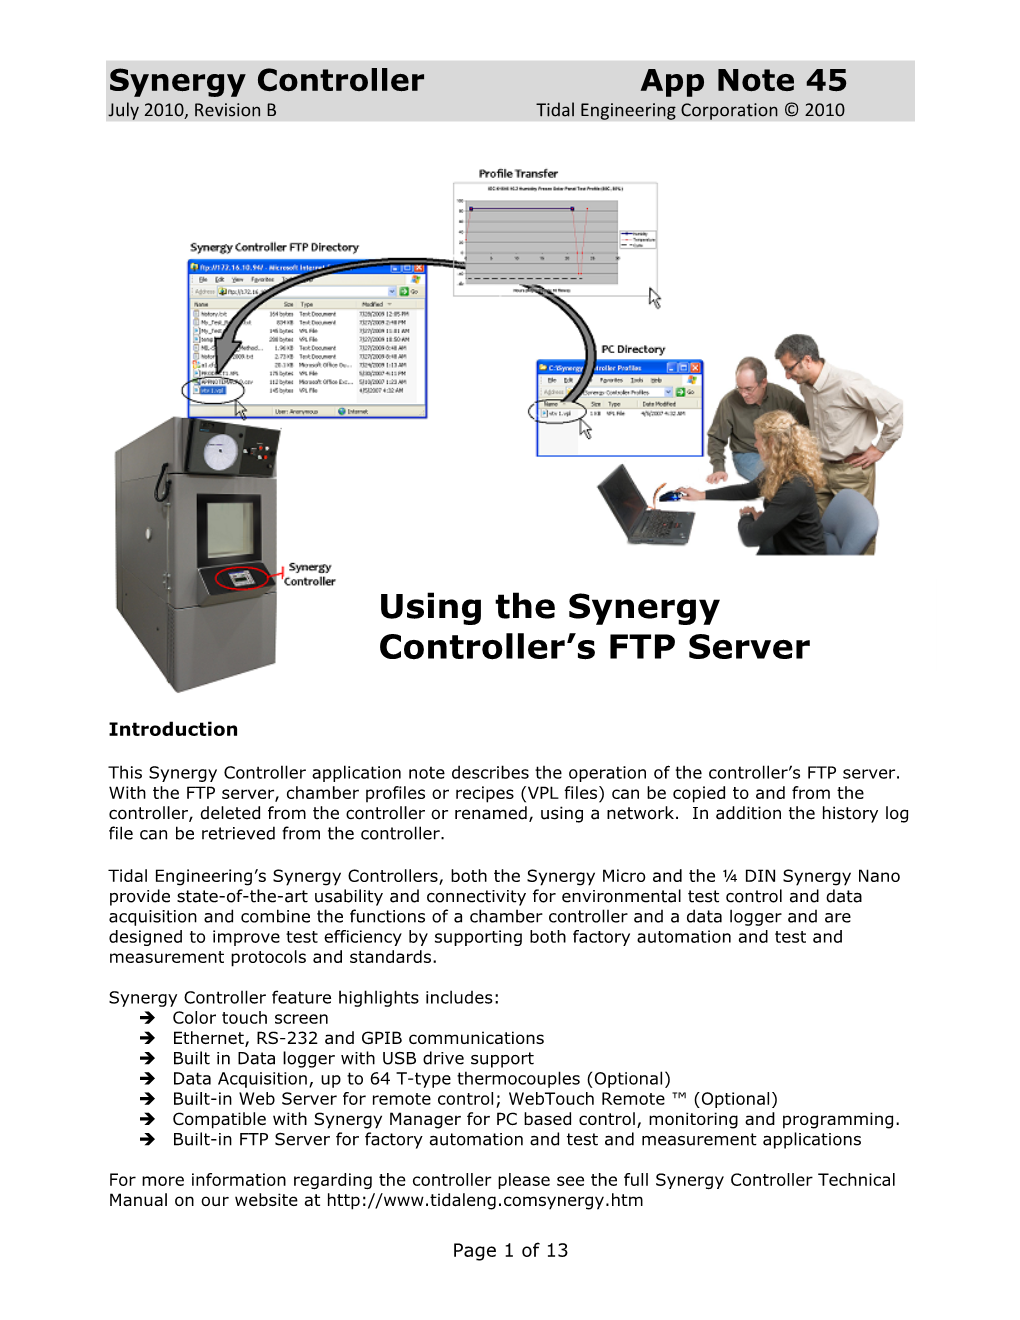 Using the Synergy Controller's FTP Server